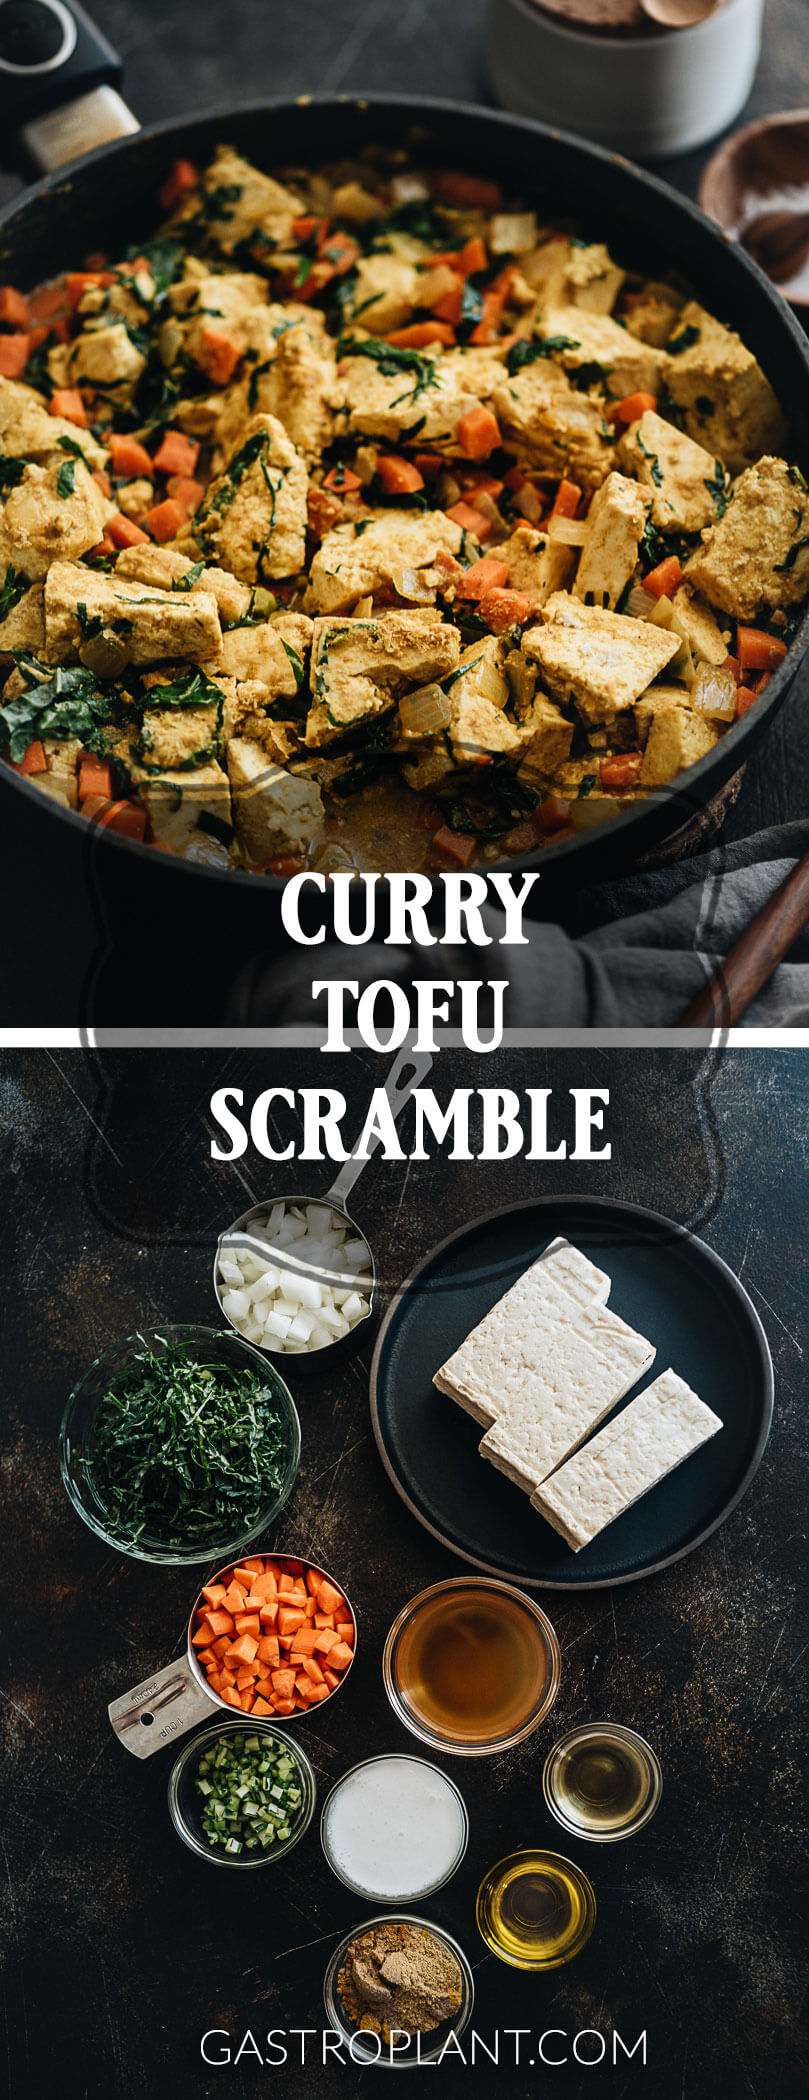 Curry Tofu Scramble - This curry tofu scramble is a vibrant, satisfying, and healthy first meal of the day. It tastes like it should be unhealthy but it’s full of clean fuel.